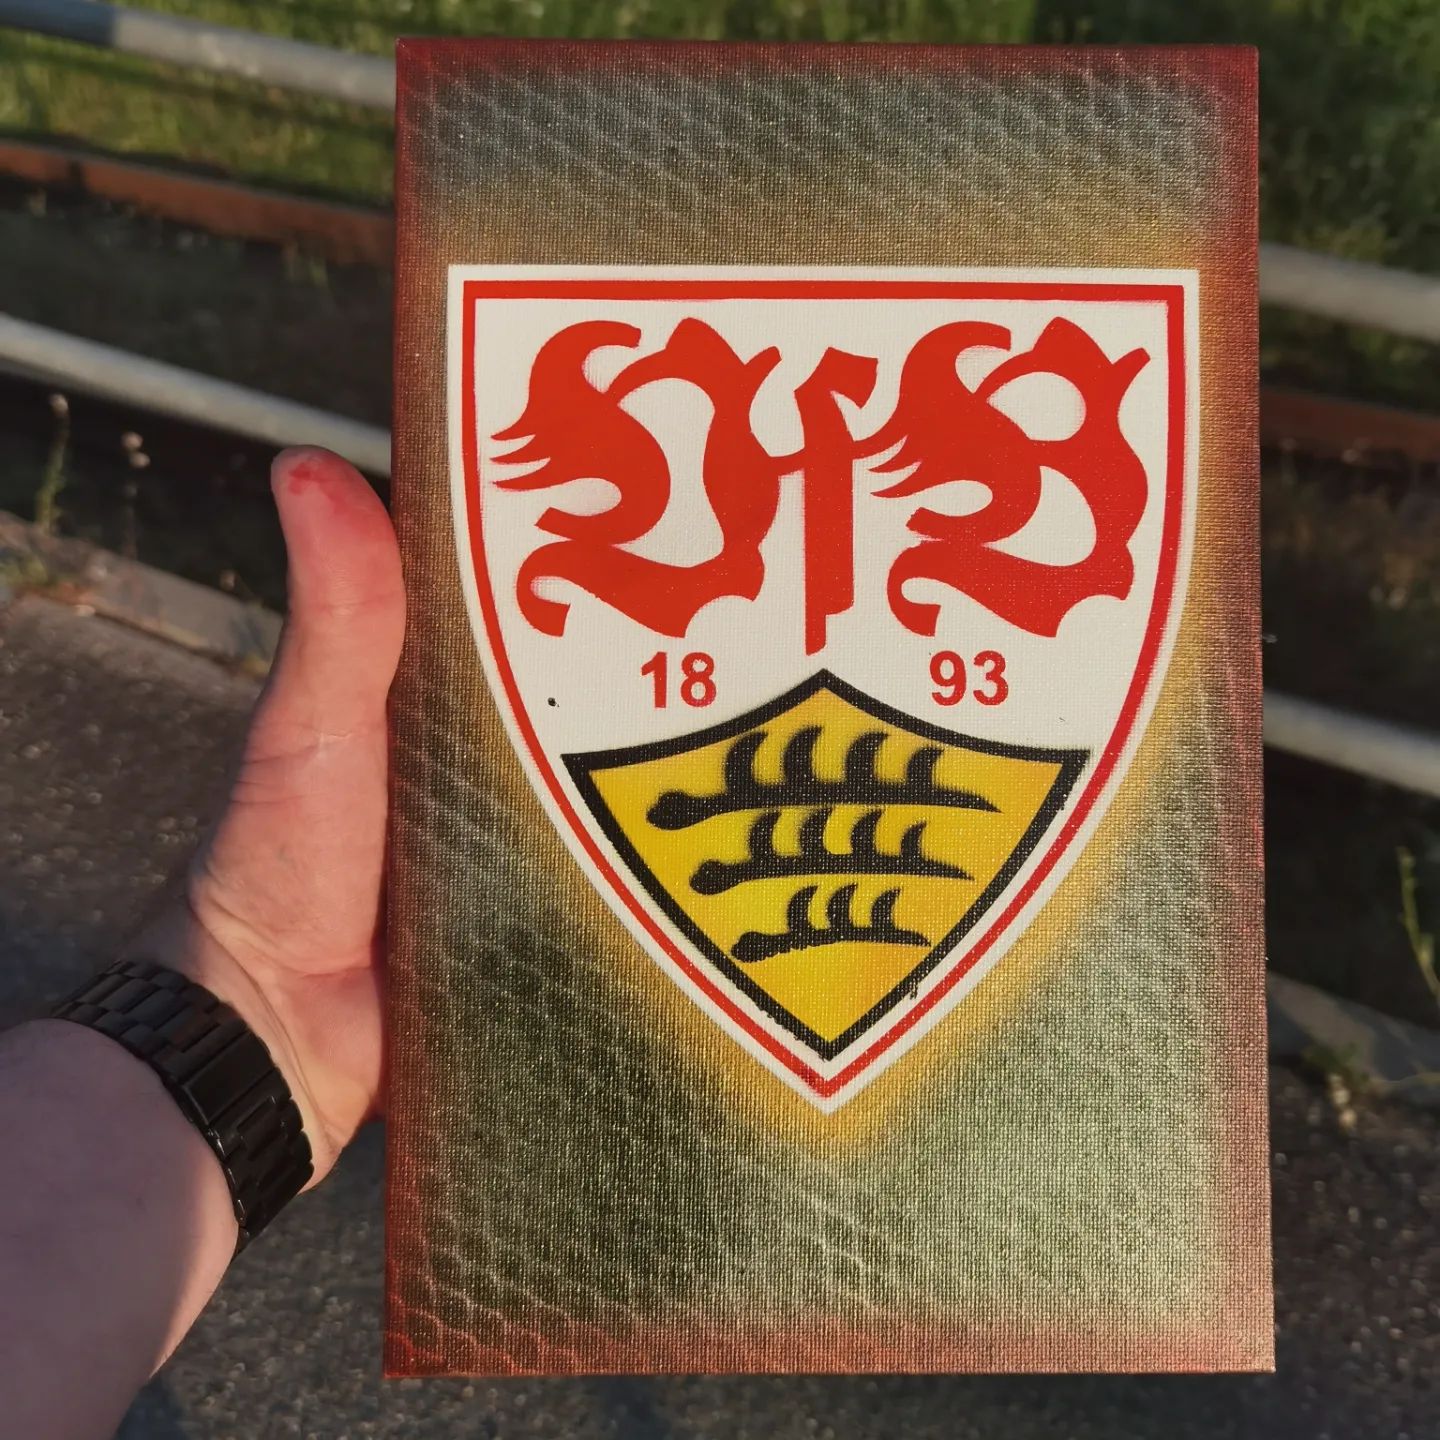 Latest Artwork we did today. This was brushed by my youngest son with my help. 
No, even this is the second time i did a VFB logo, im not a fan of this club, but my sons are.  #airbrush #airbrushart #kunst #vfbstuttgart #artwork #fanart #luftpinselkunst